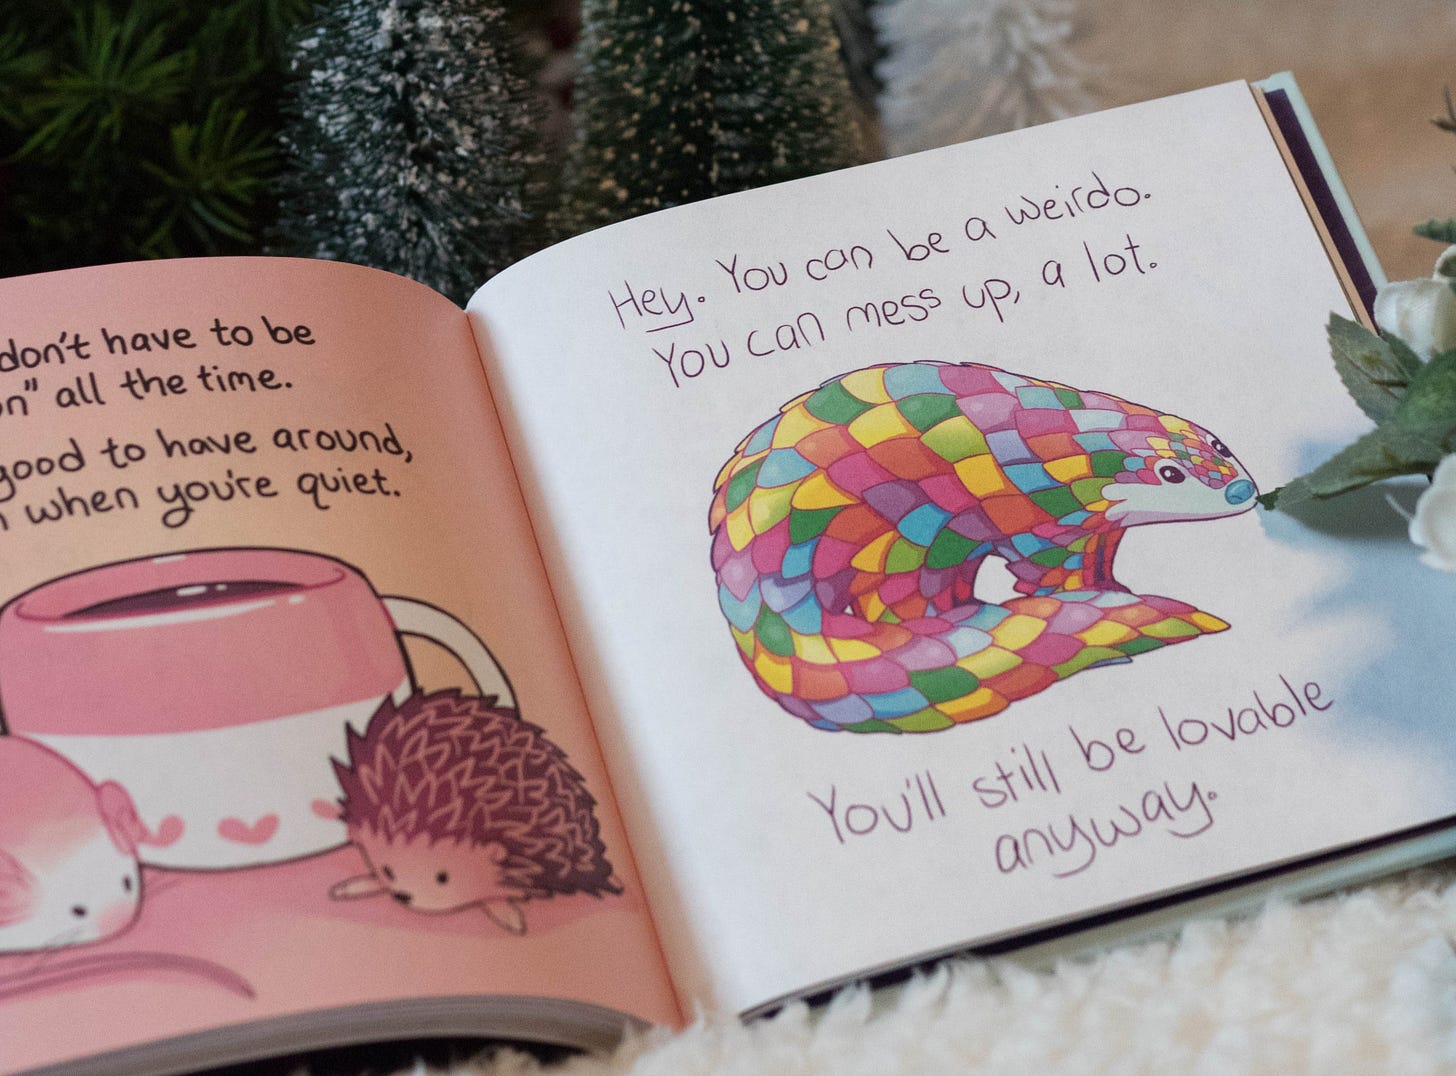 Drawing of a rainbow armadillo with text that reads Hey. You can be a weirdo. You can mess up, a lot. You'll still be lovable anyway.